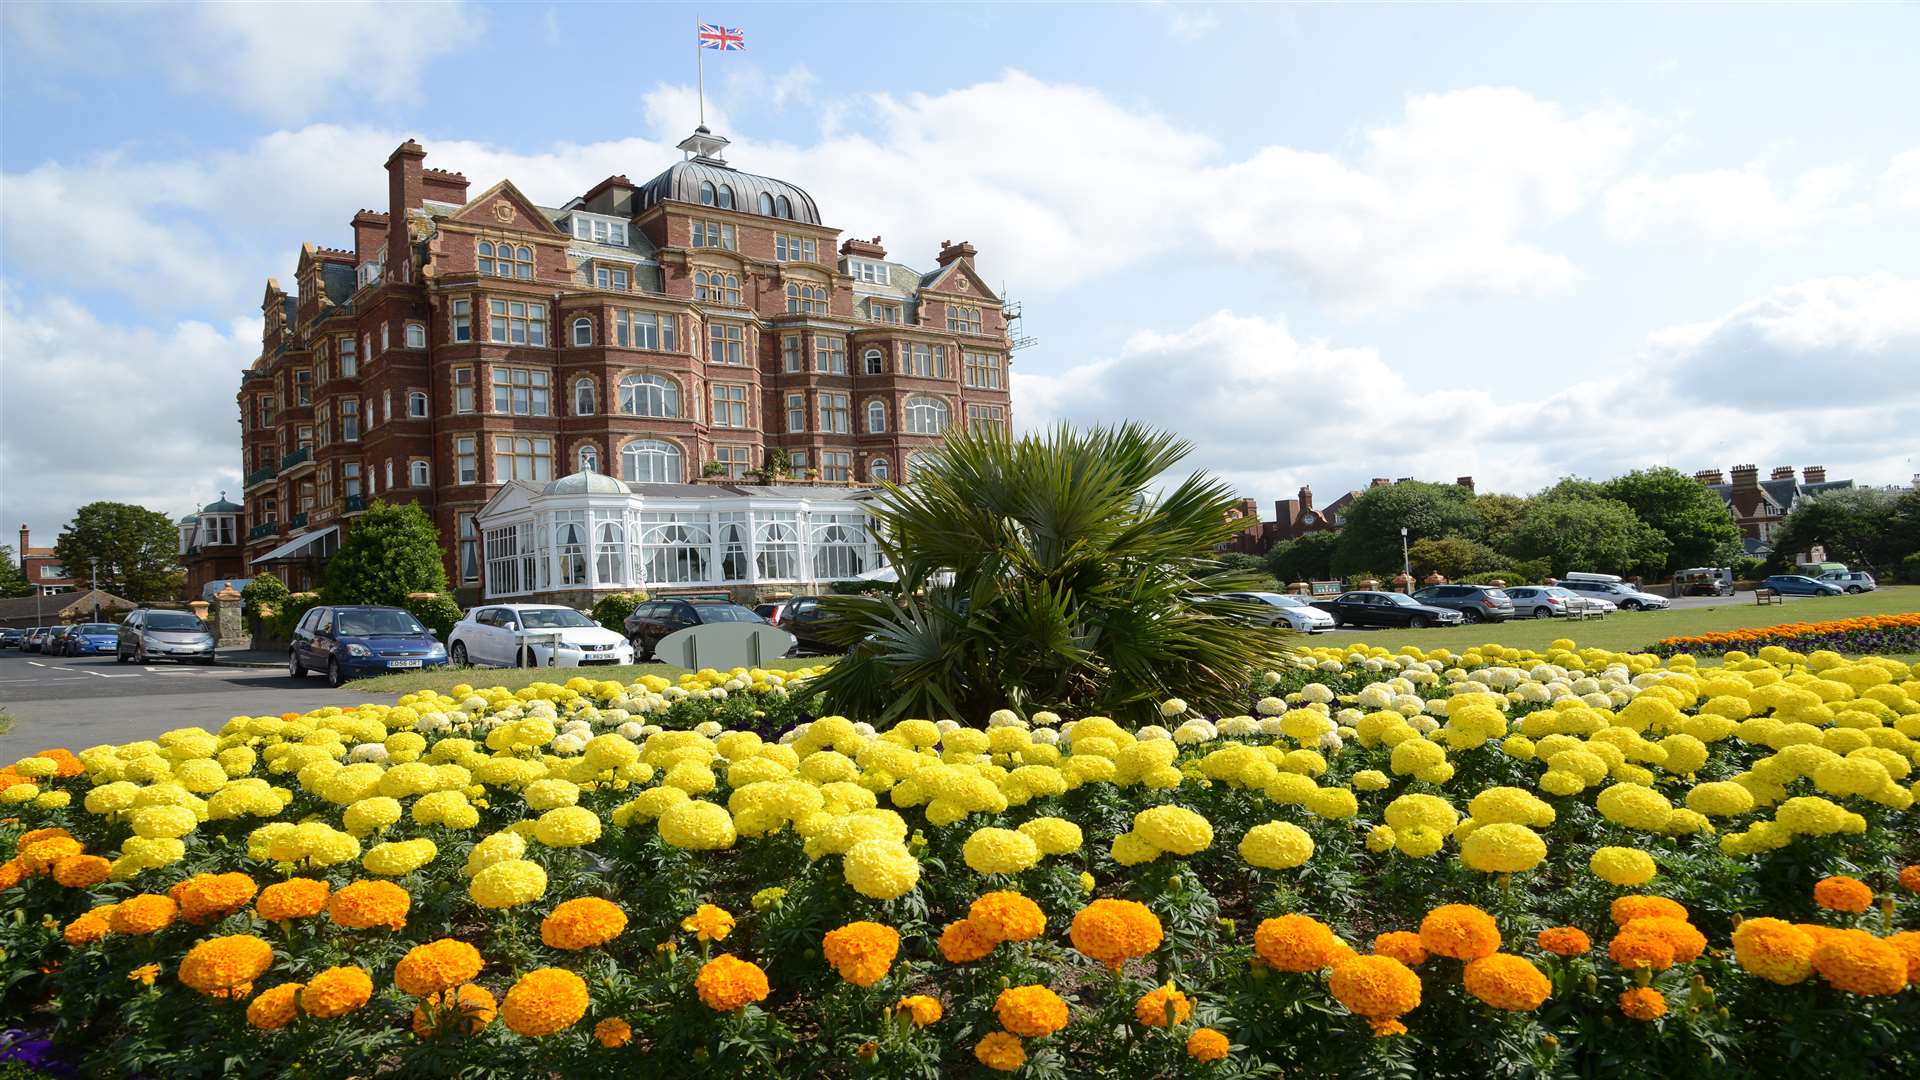 The Grand Hotel on the Leas at Folkestone